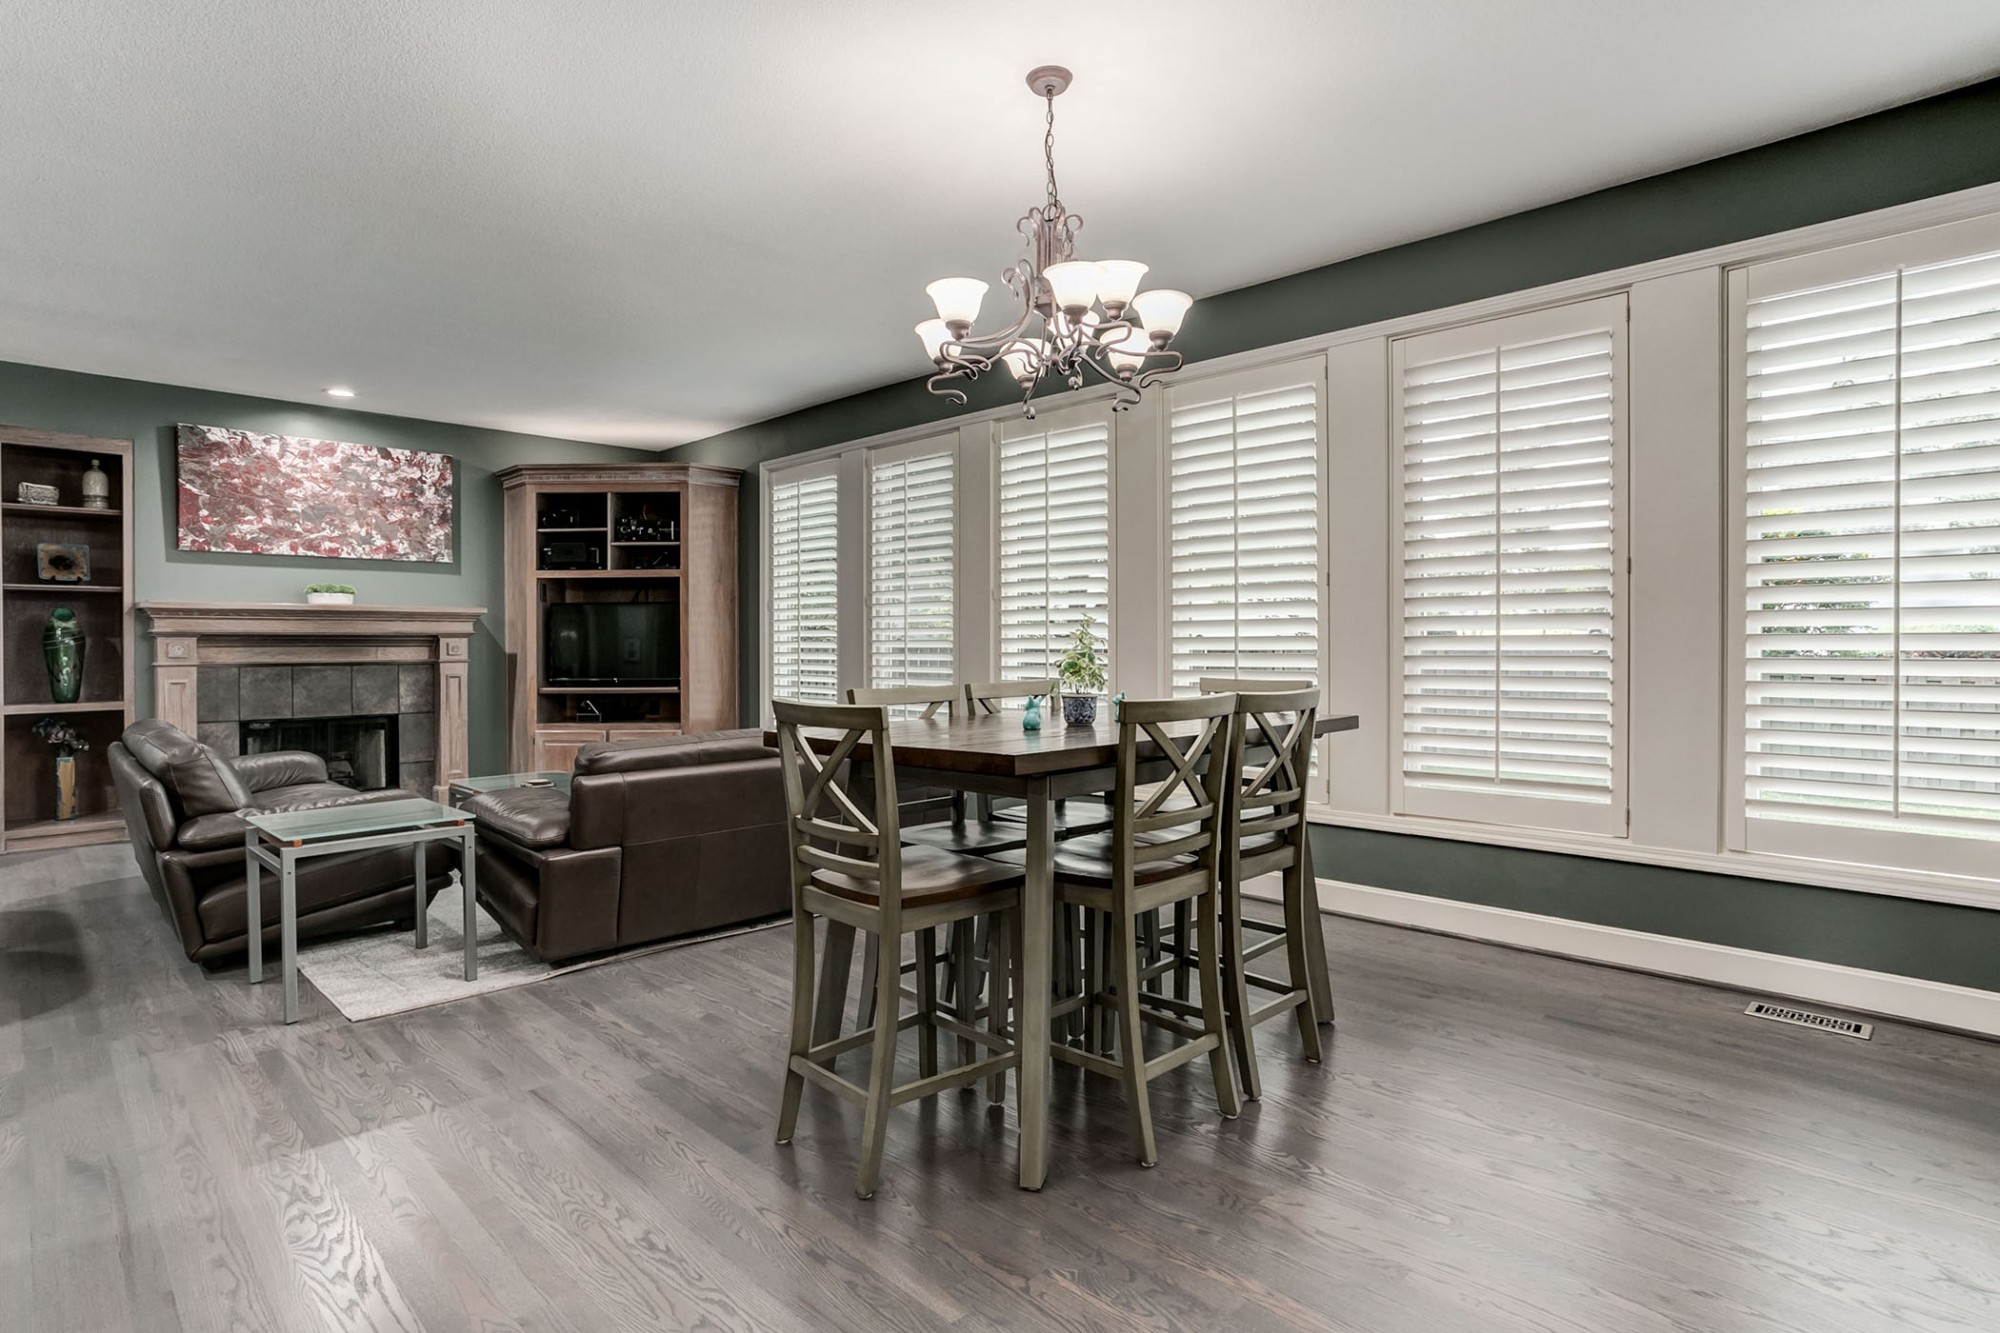 Newly refinished hardwoods beautifully displayed in the family dining area accented by a wall of plantation shutters.